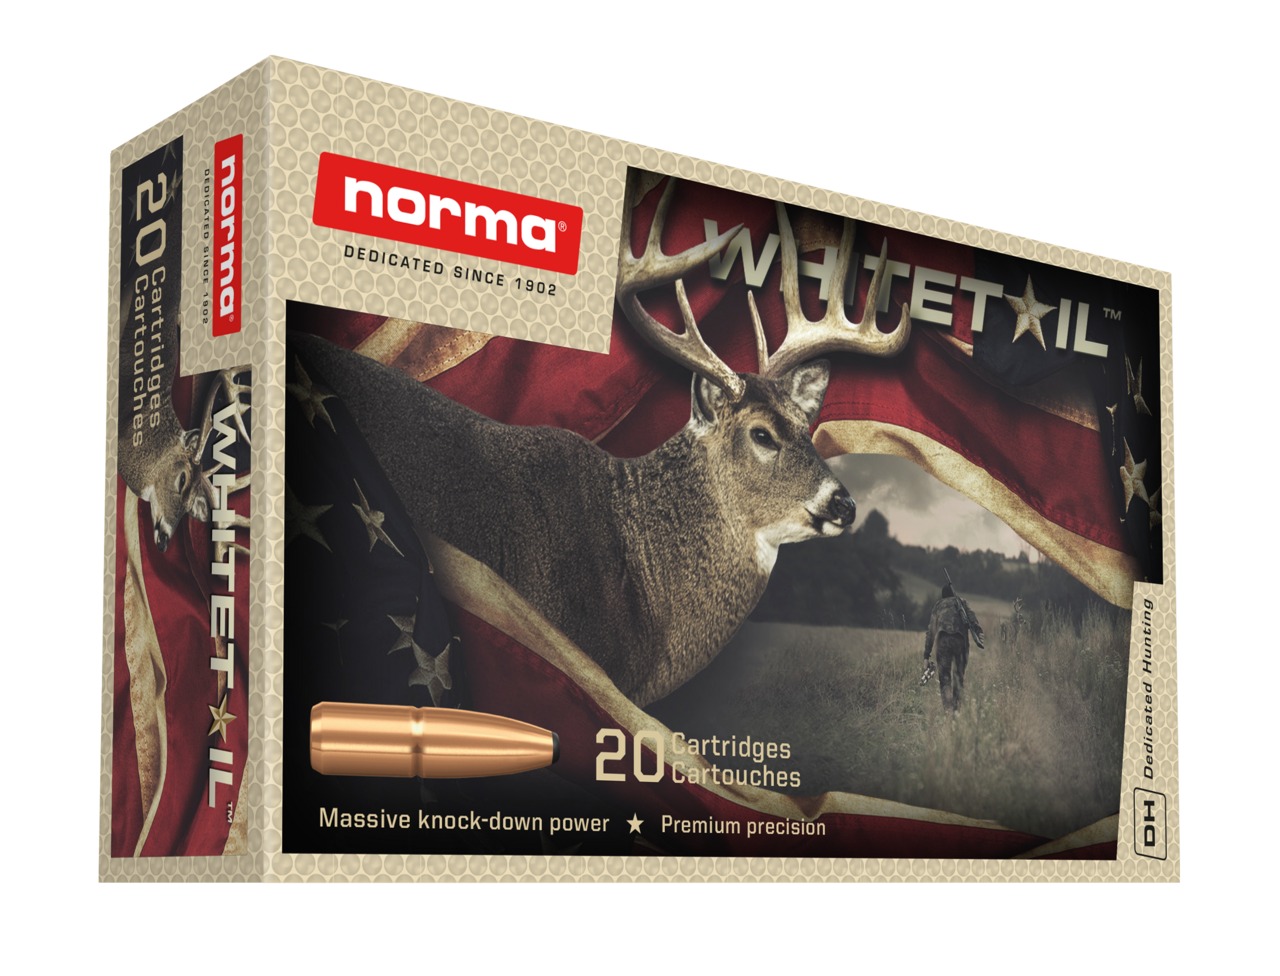 CART NORMA .270 WIN 130GR WHITETAIL BTE 20 ref 20169562 NORMA